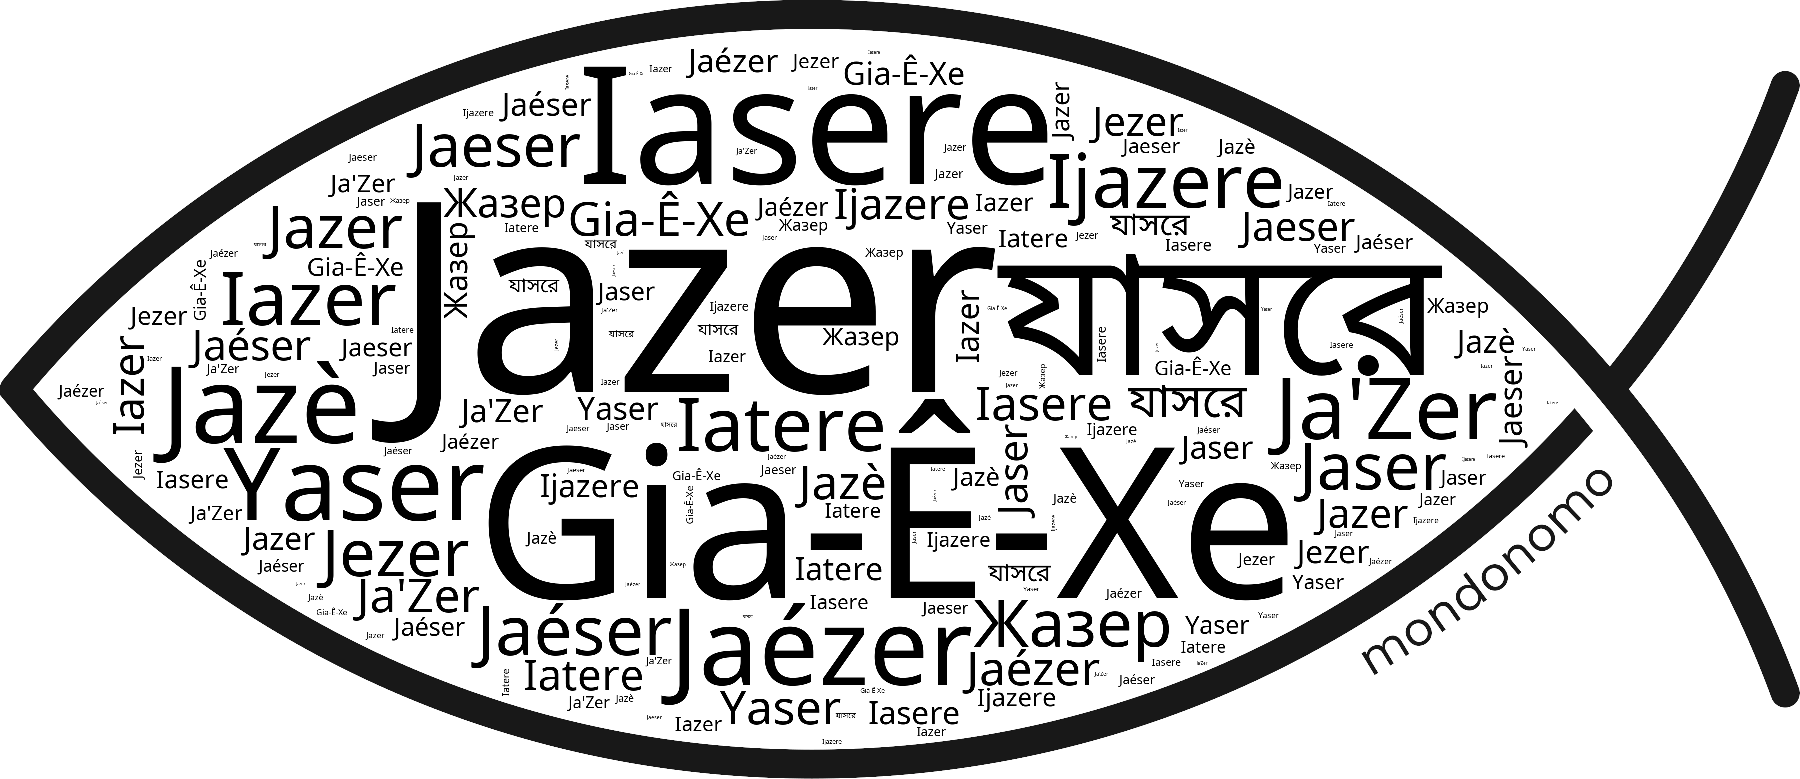 Name Jazer in the world's Bibles